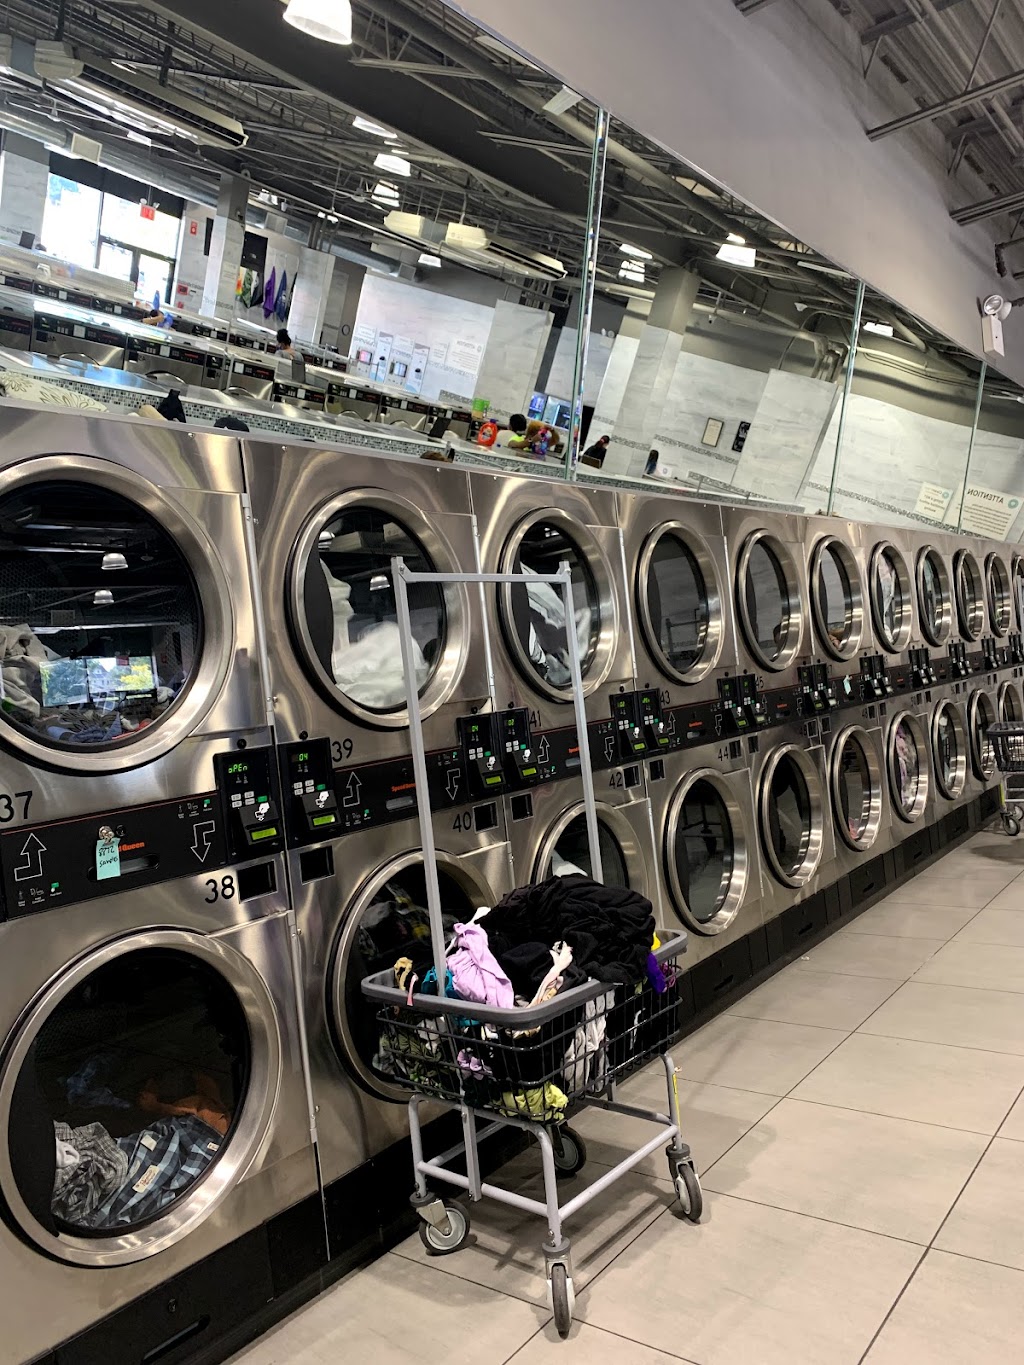 CleanFresh Laundromat | 1745 Central Park Ave, Yonkers, NY 10710, USA | Phone: (914) 361-1313